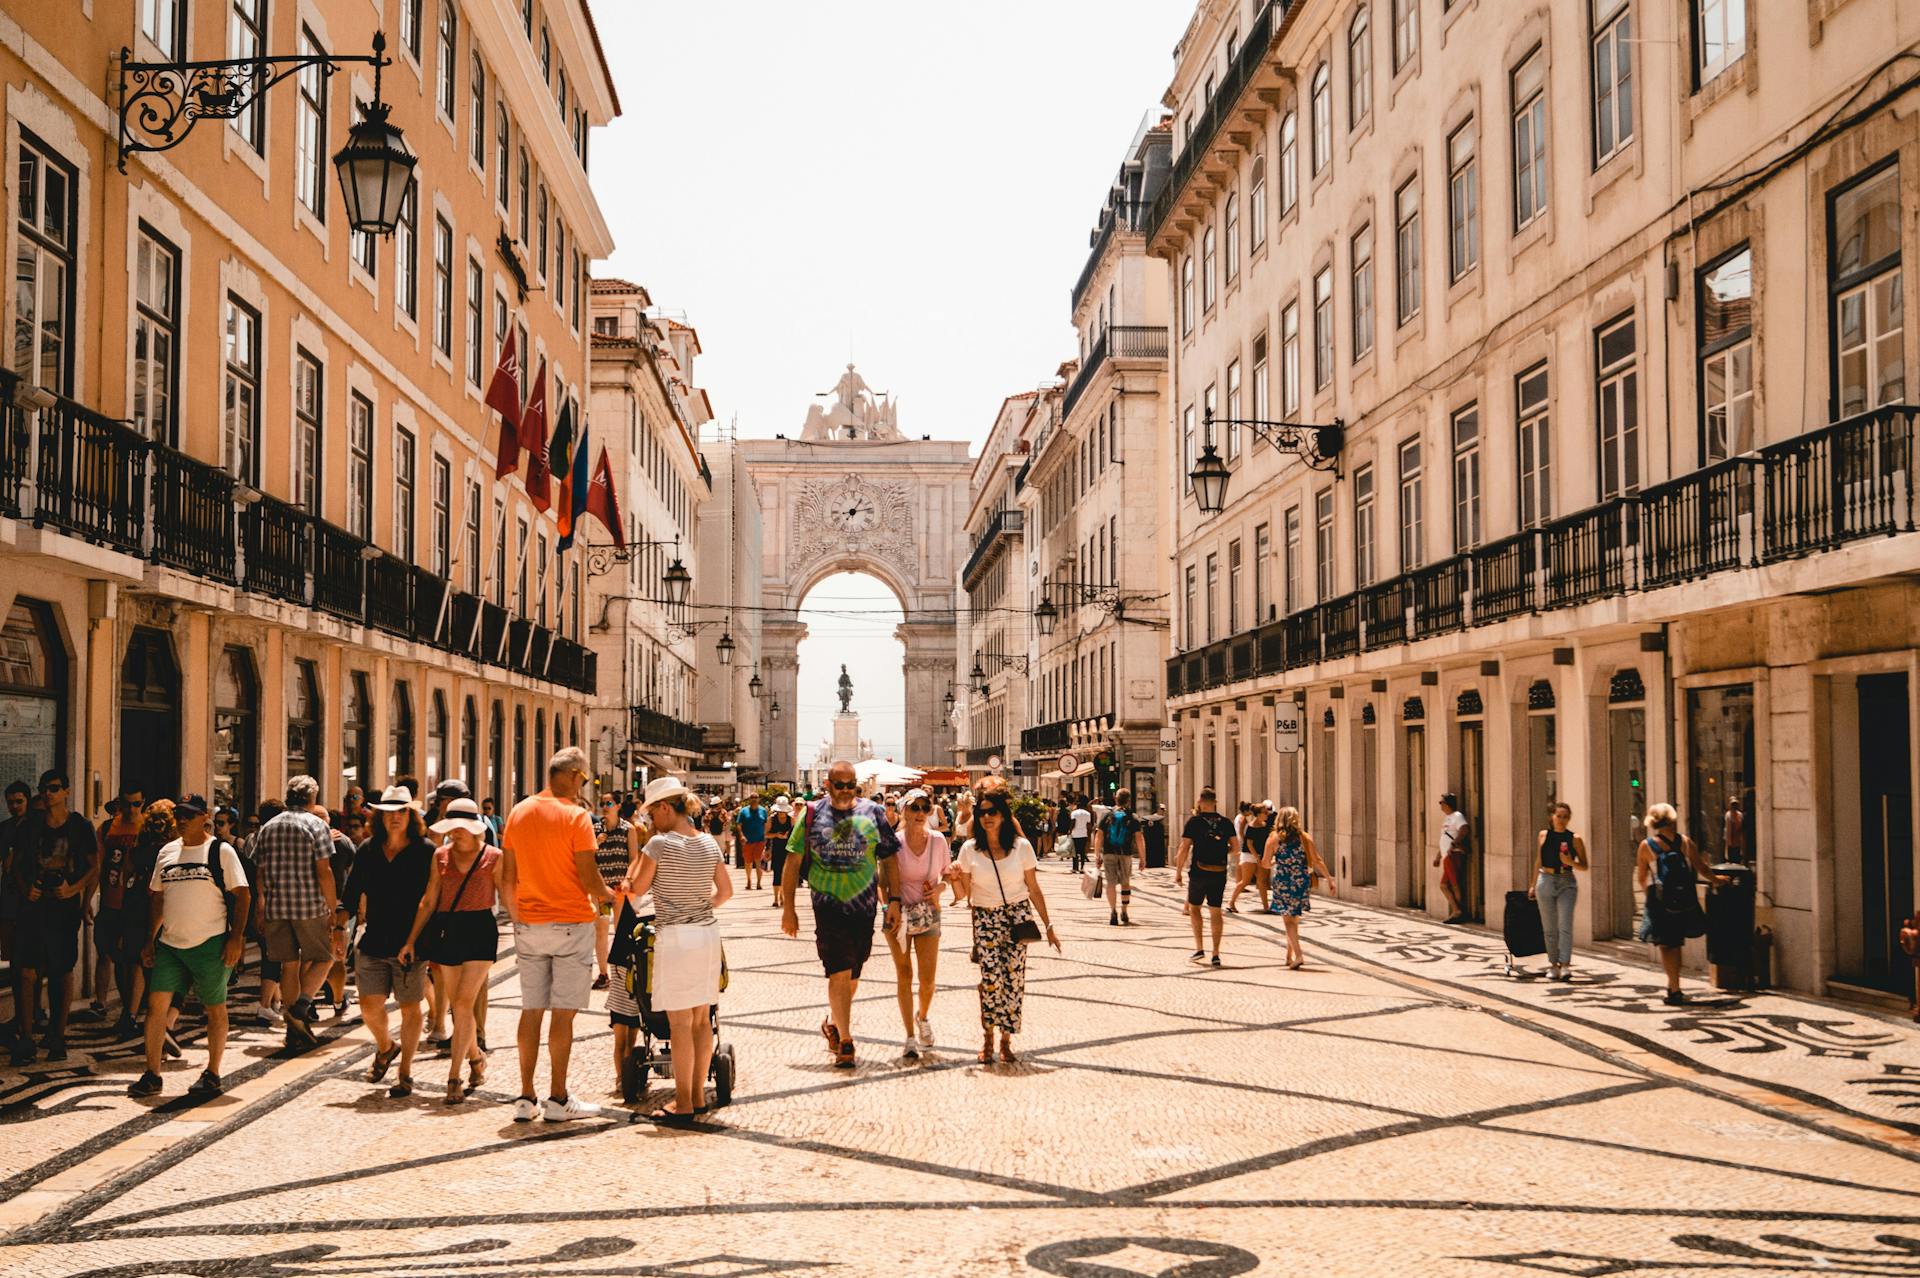 The Ultimate Guide For Getting Portugal’s Golden Visa In 2022